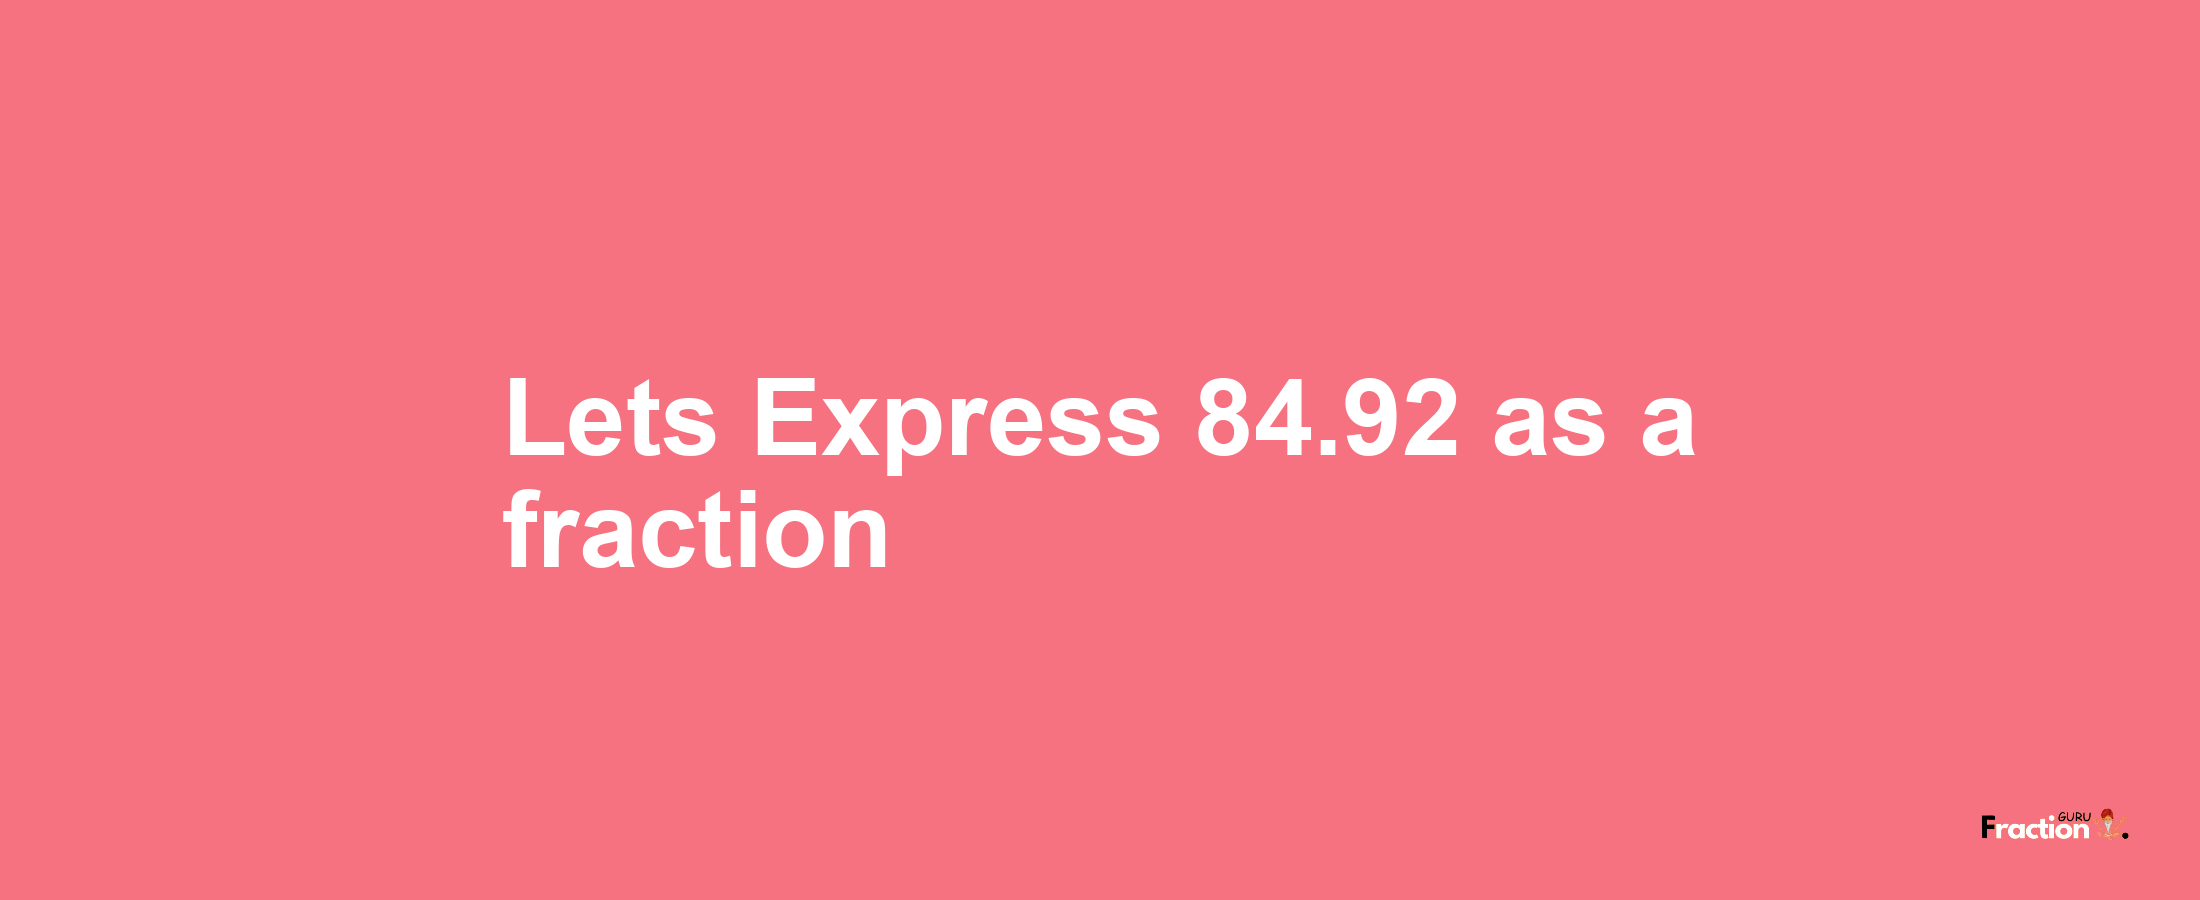 Lets Express 84.92 as afraction